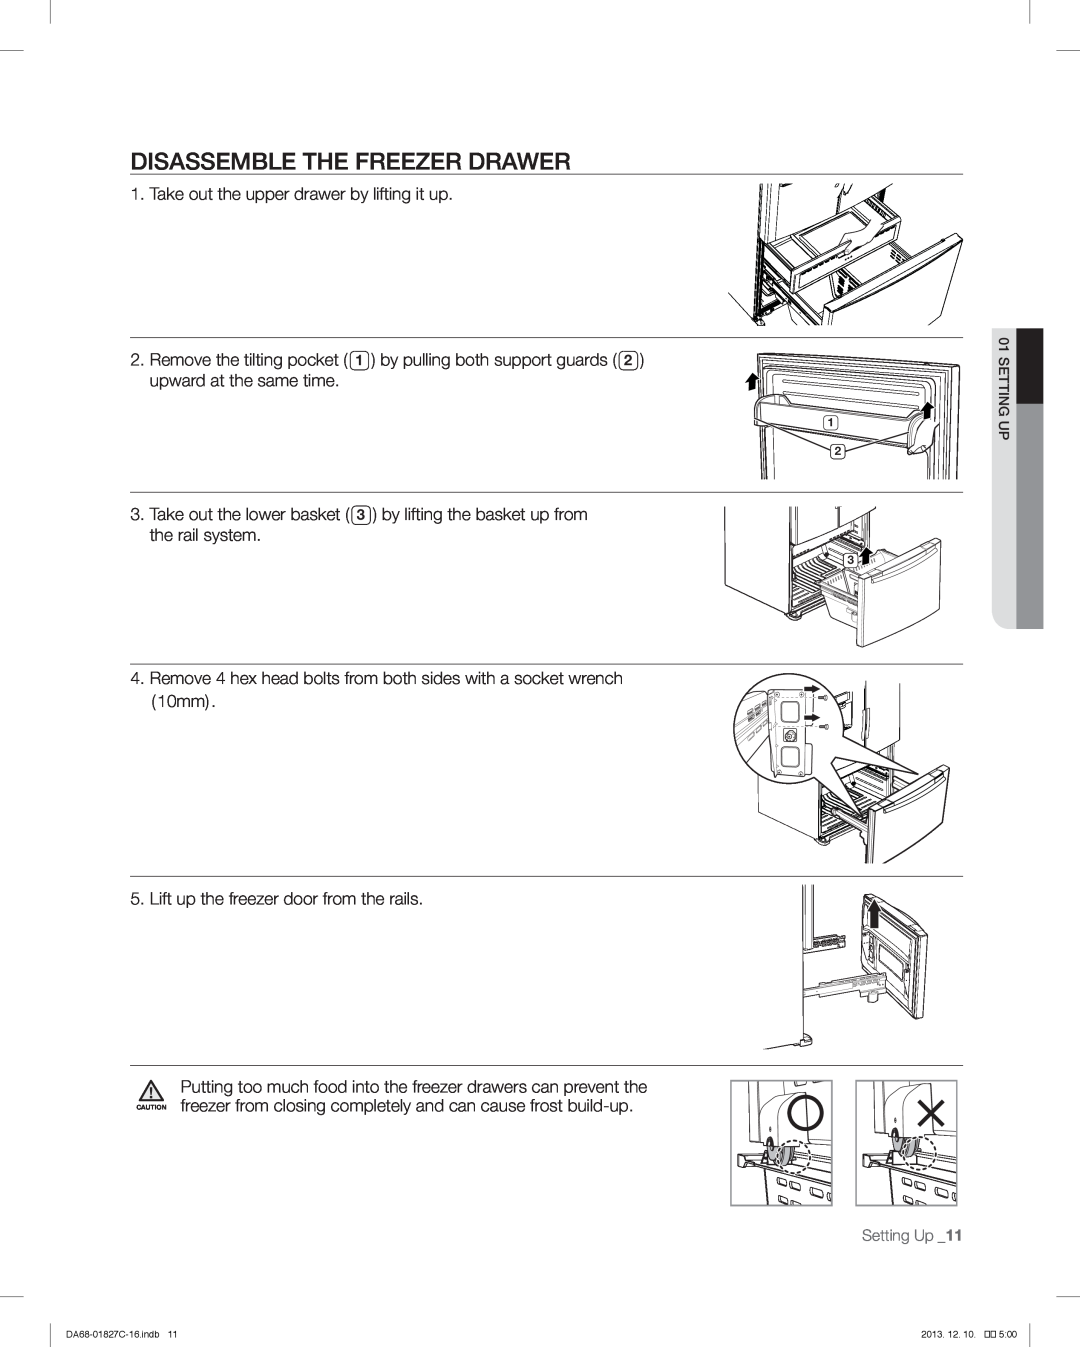 Samsung RFG237AARS user manual Disassemble The Freezer Drawer 